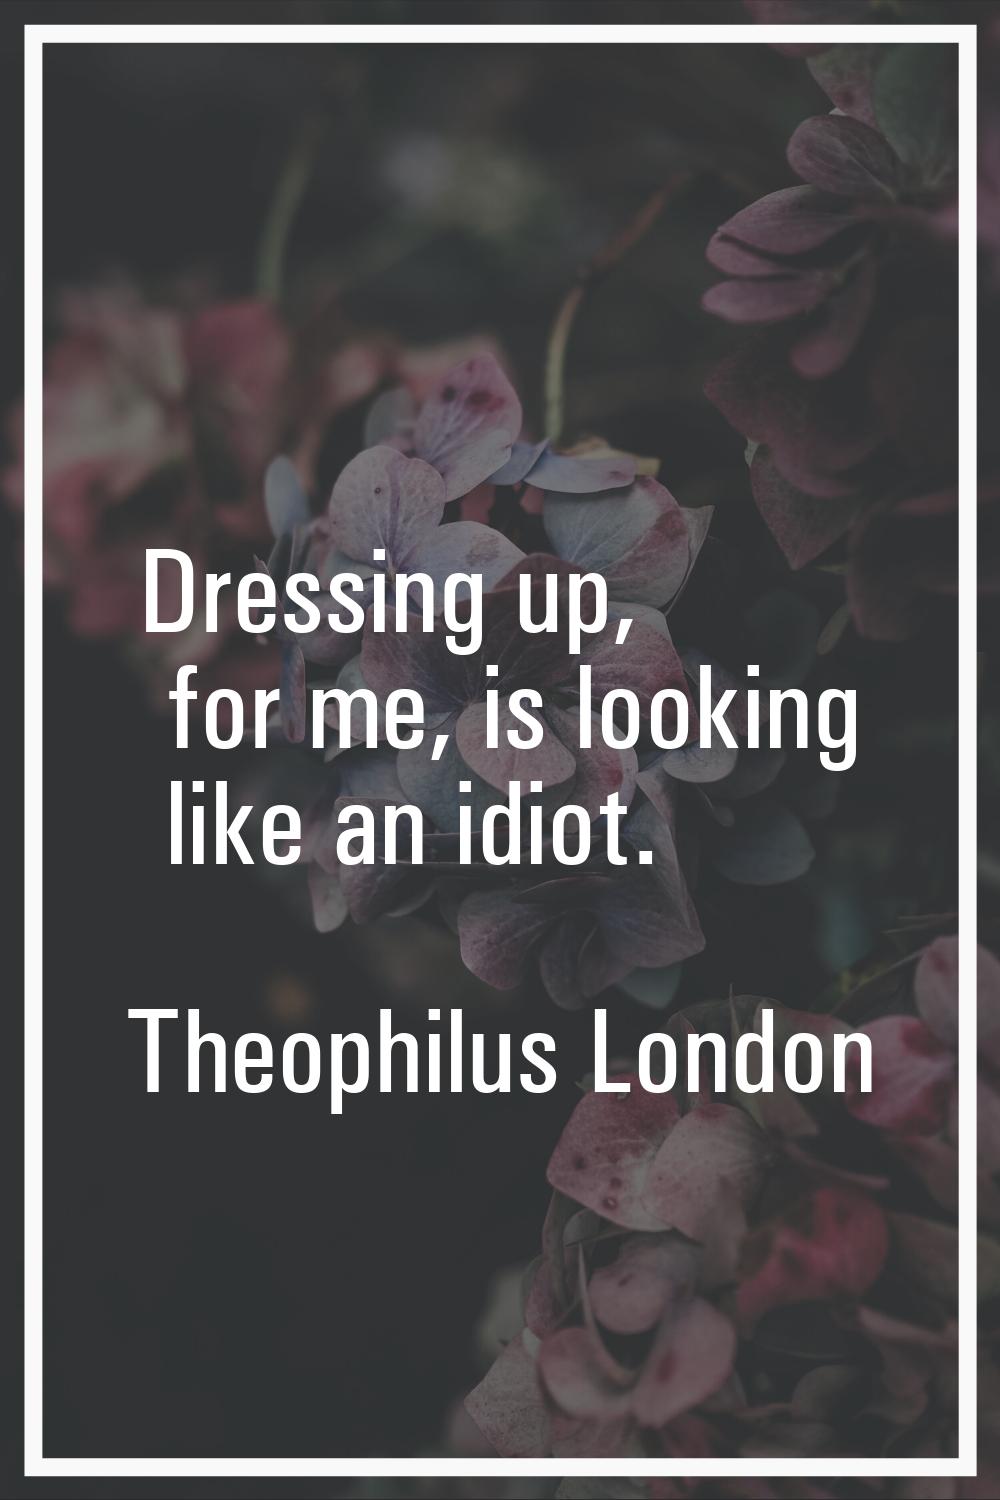 Dressing up, for me, is looking like an idiot.